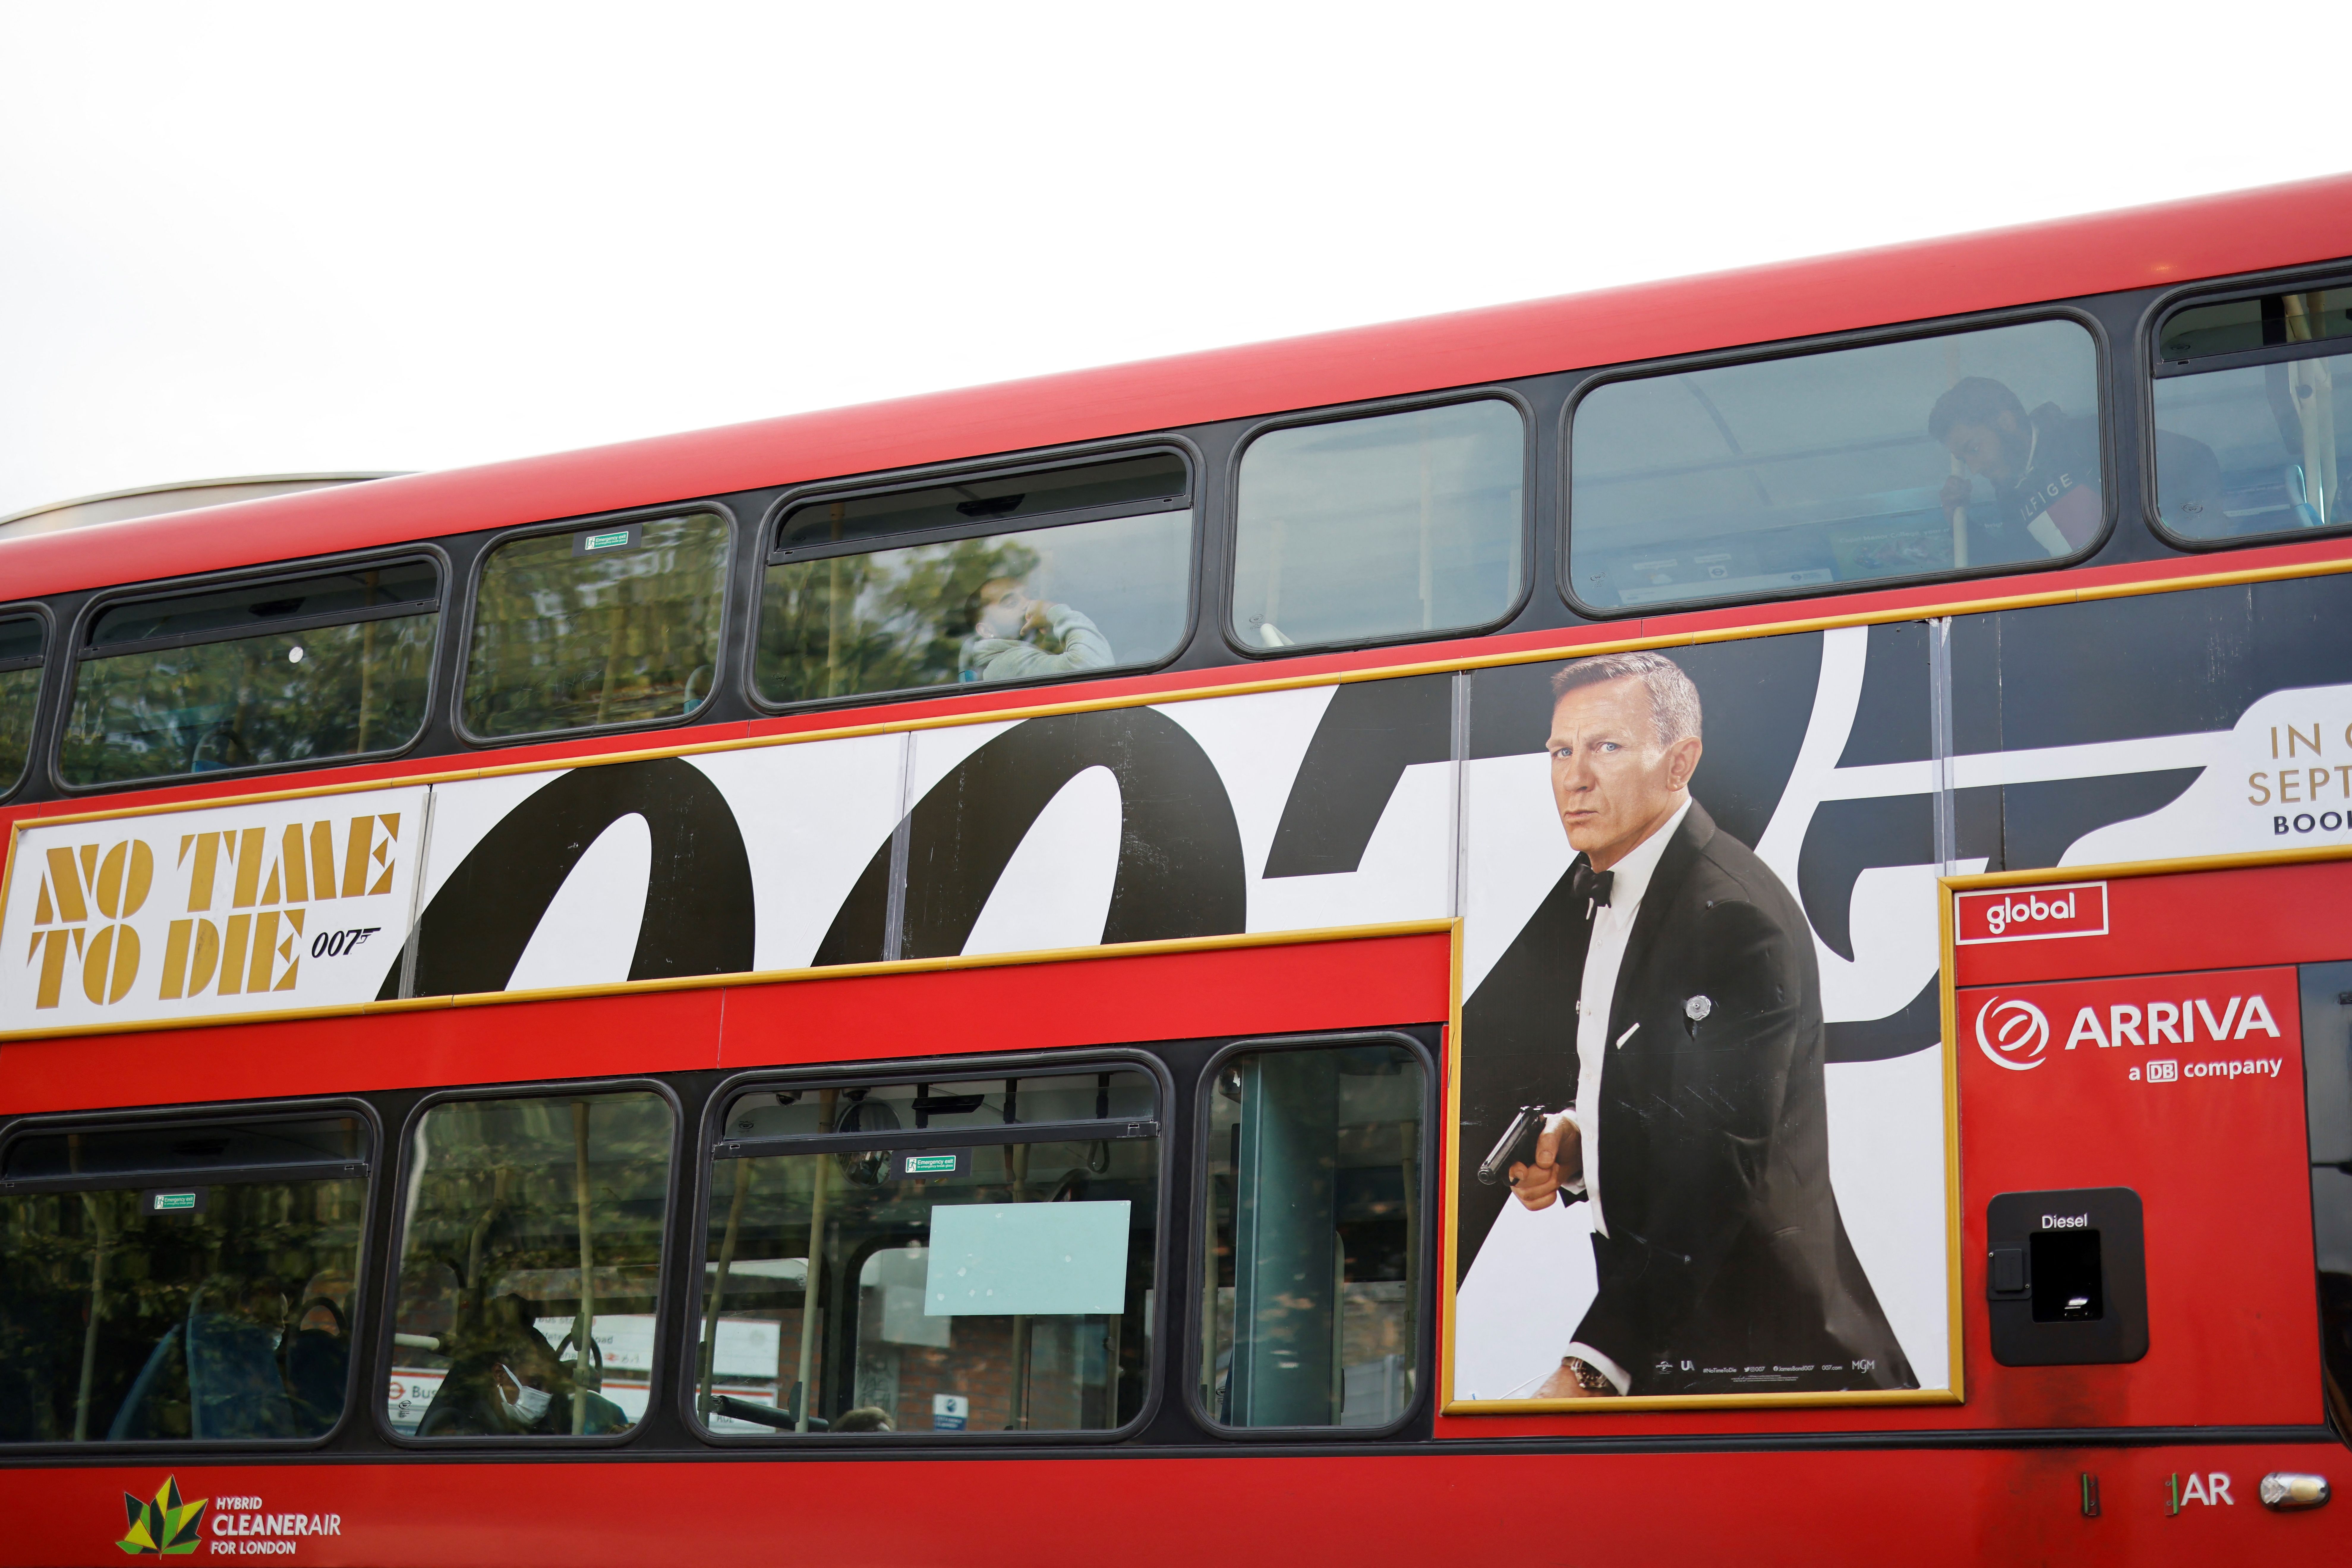 A London red bus goes past a street with a poster of the latest James Bond film "No Time To Die" in London on October 4, 2021. (Photo by Tolga Akmen / AFP) (Photo by TOLGA AKMEN/AFP via Getty Images)